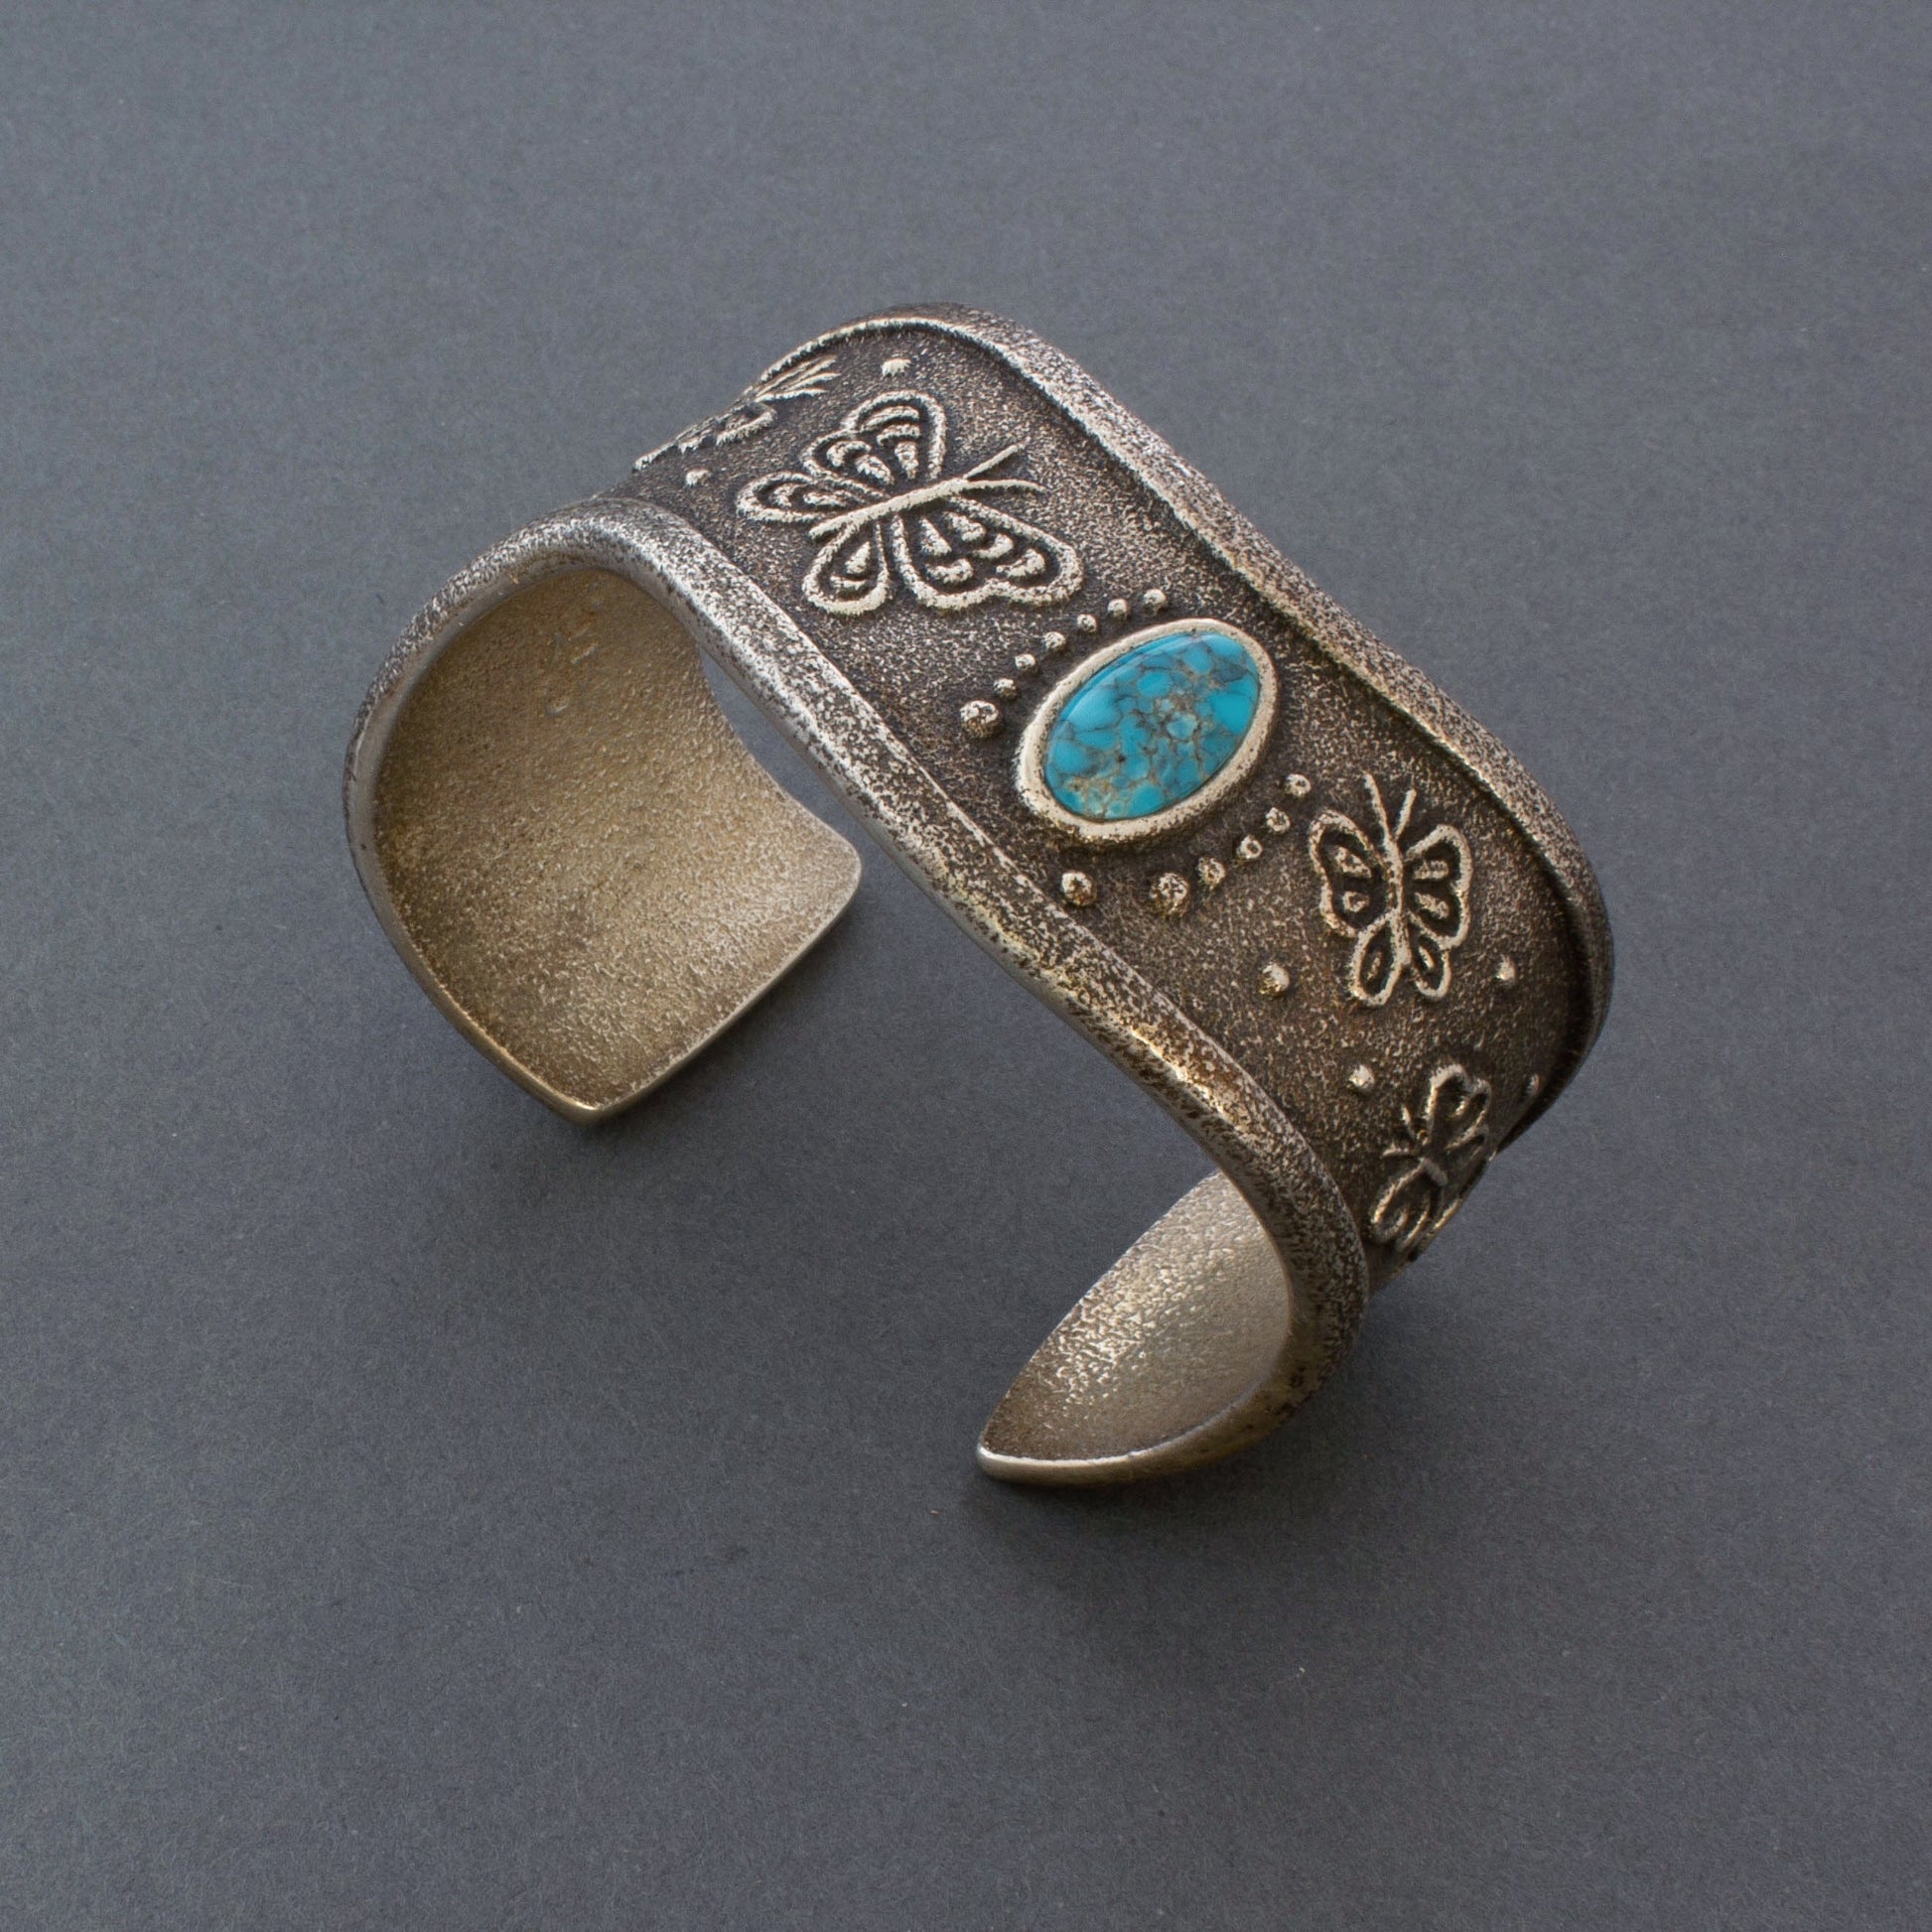 Rebecca Begay Tufa Cast Silver Butterfly Bracelet with Turquoise - Turquoise & Tufa